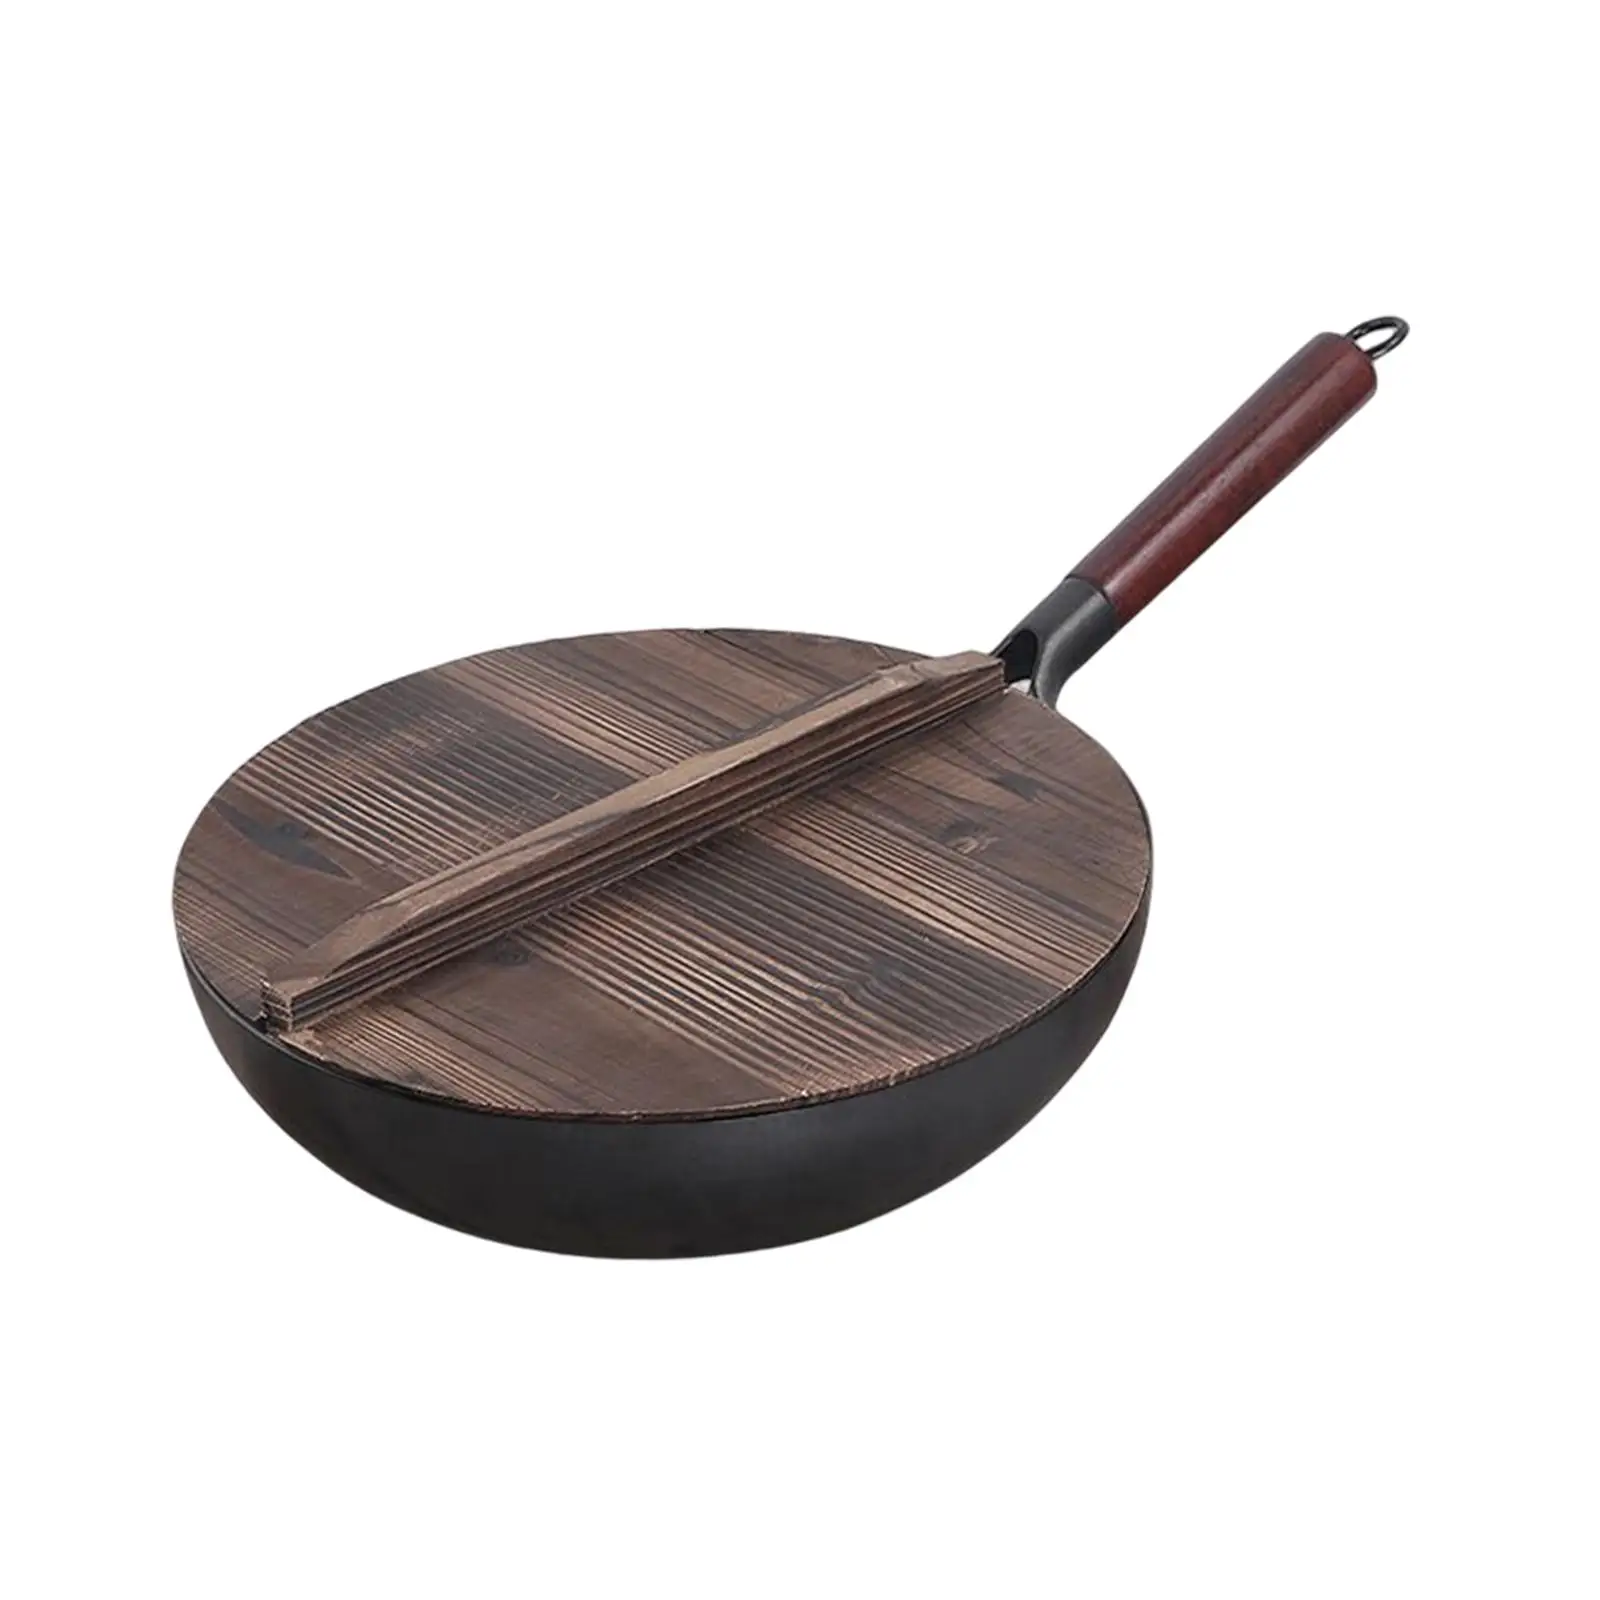 Wok Pan Household Long Handle Wok Pan with Lid for Induction Electric, Gas, 12inch Vegetable